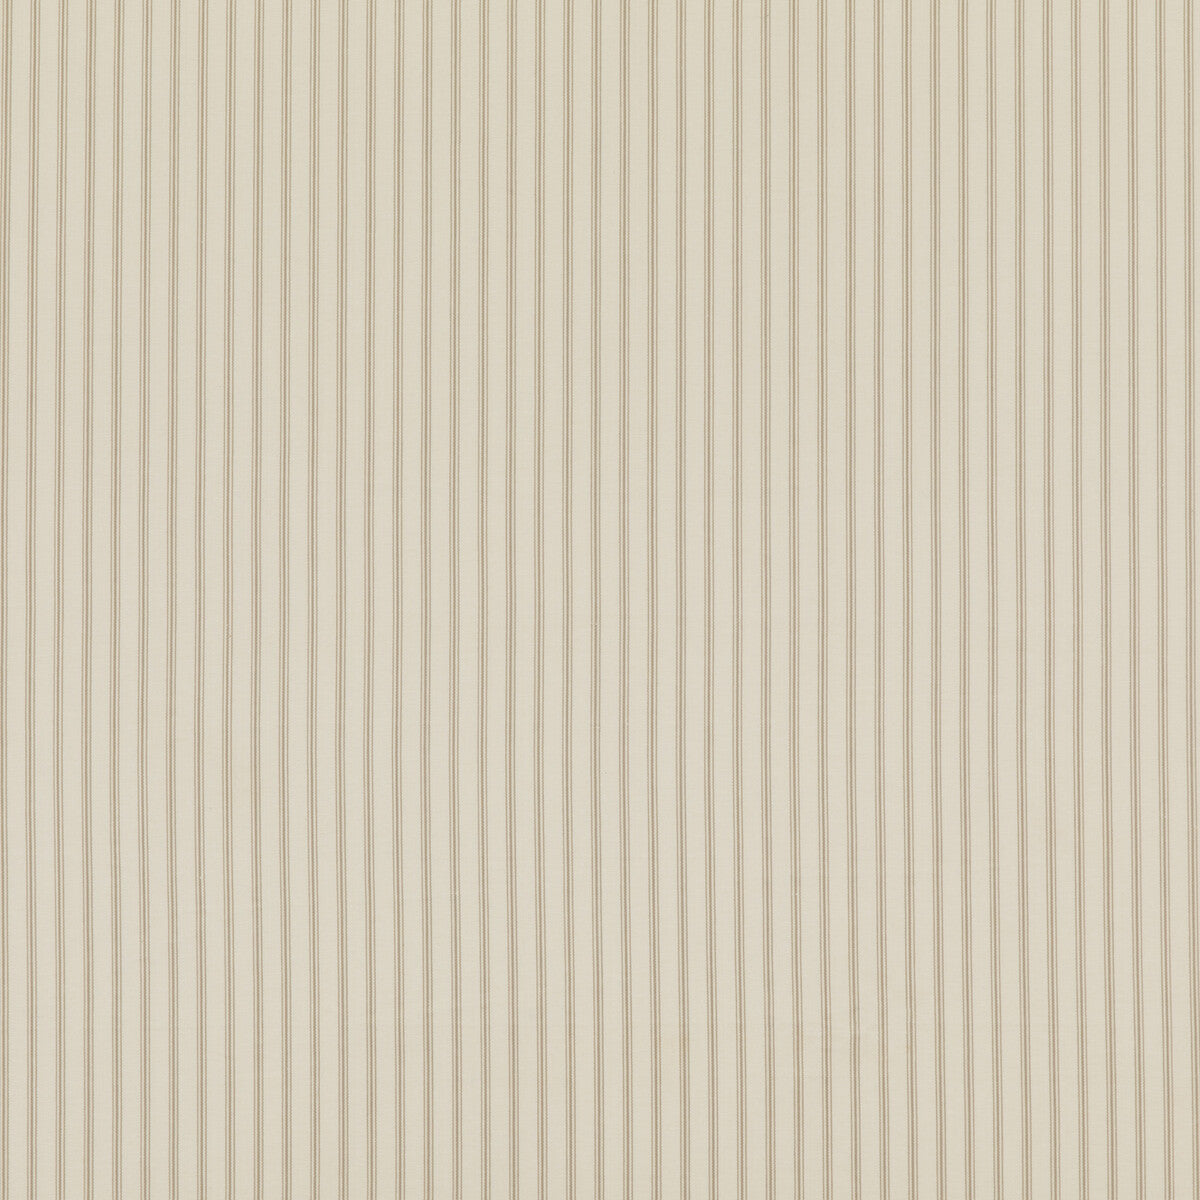 Renwick fabric in taupe color - pattern ED85300.210.0 - by Threads in the Great Stripes collection